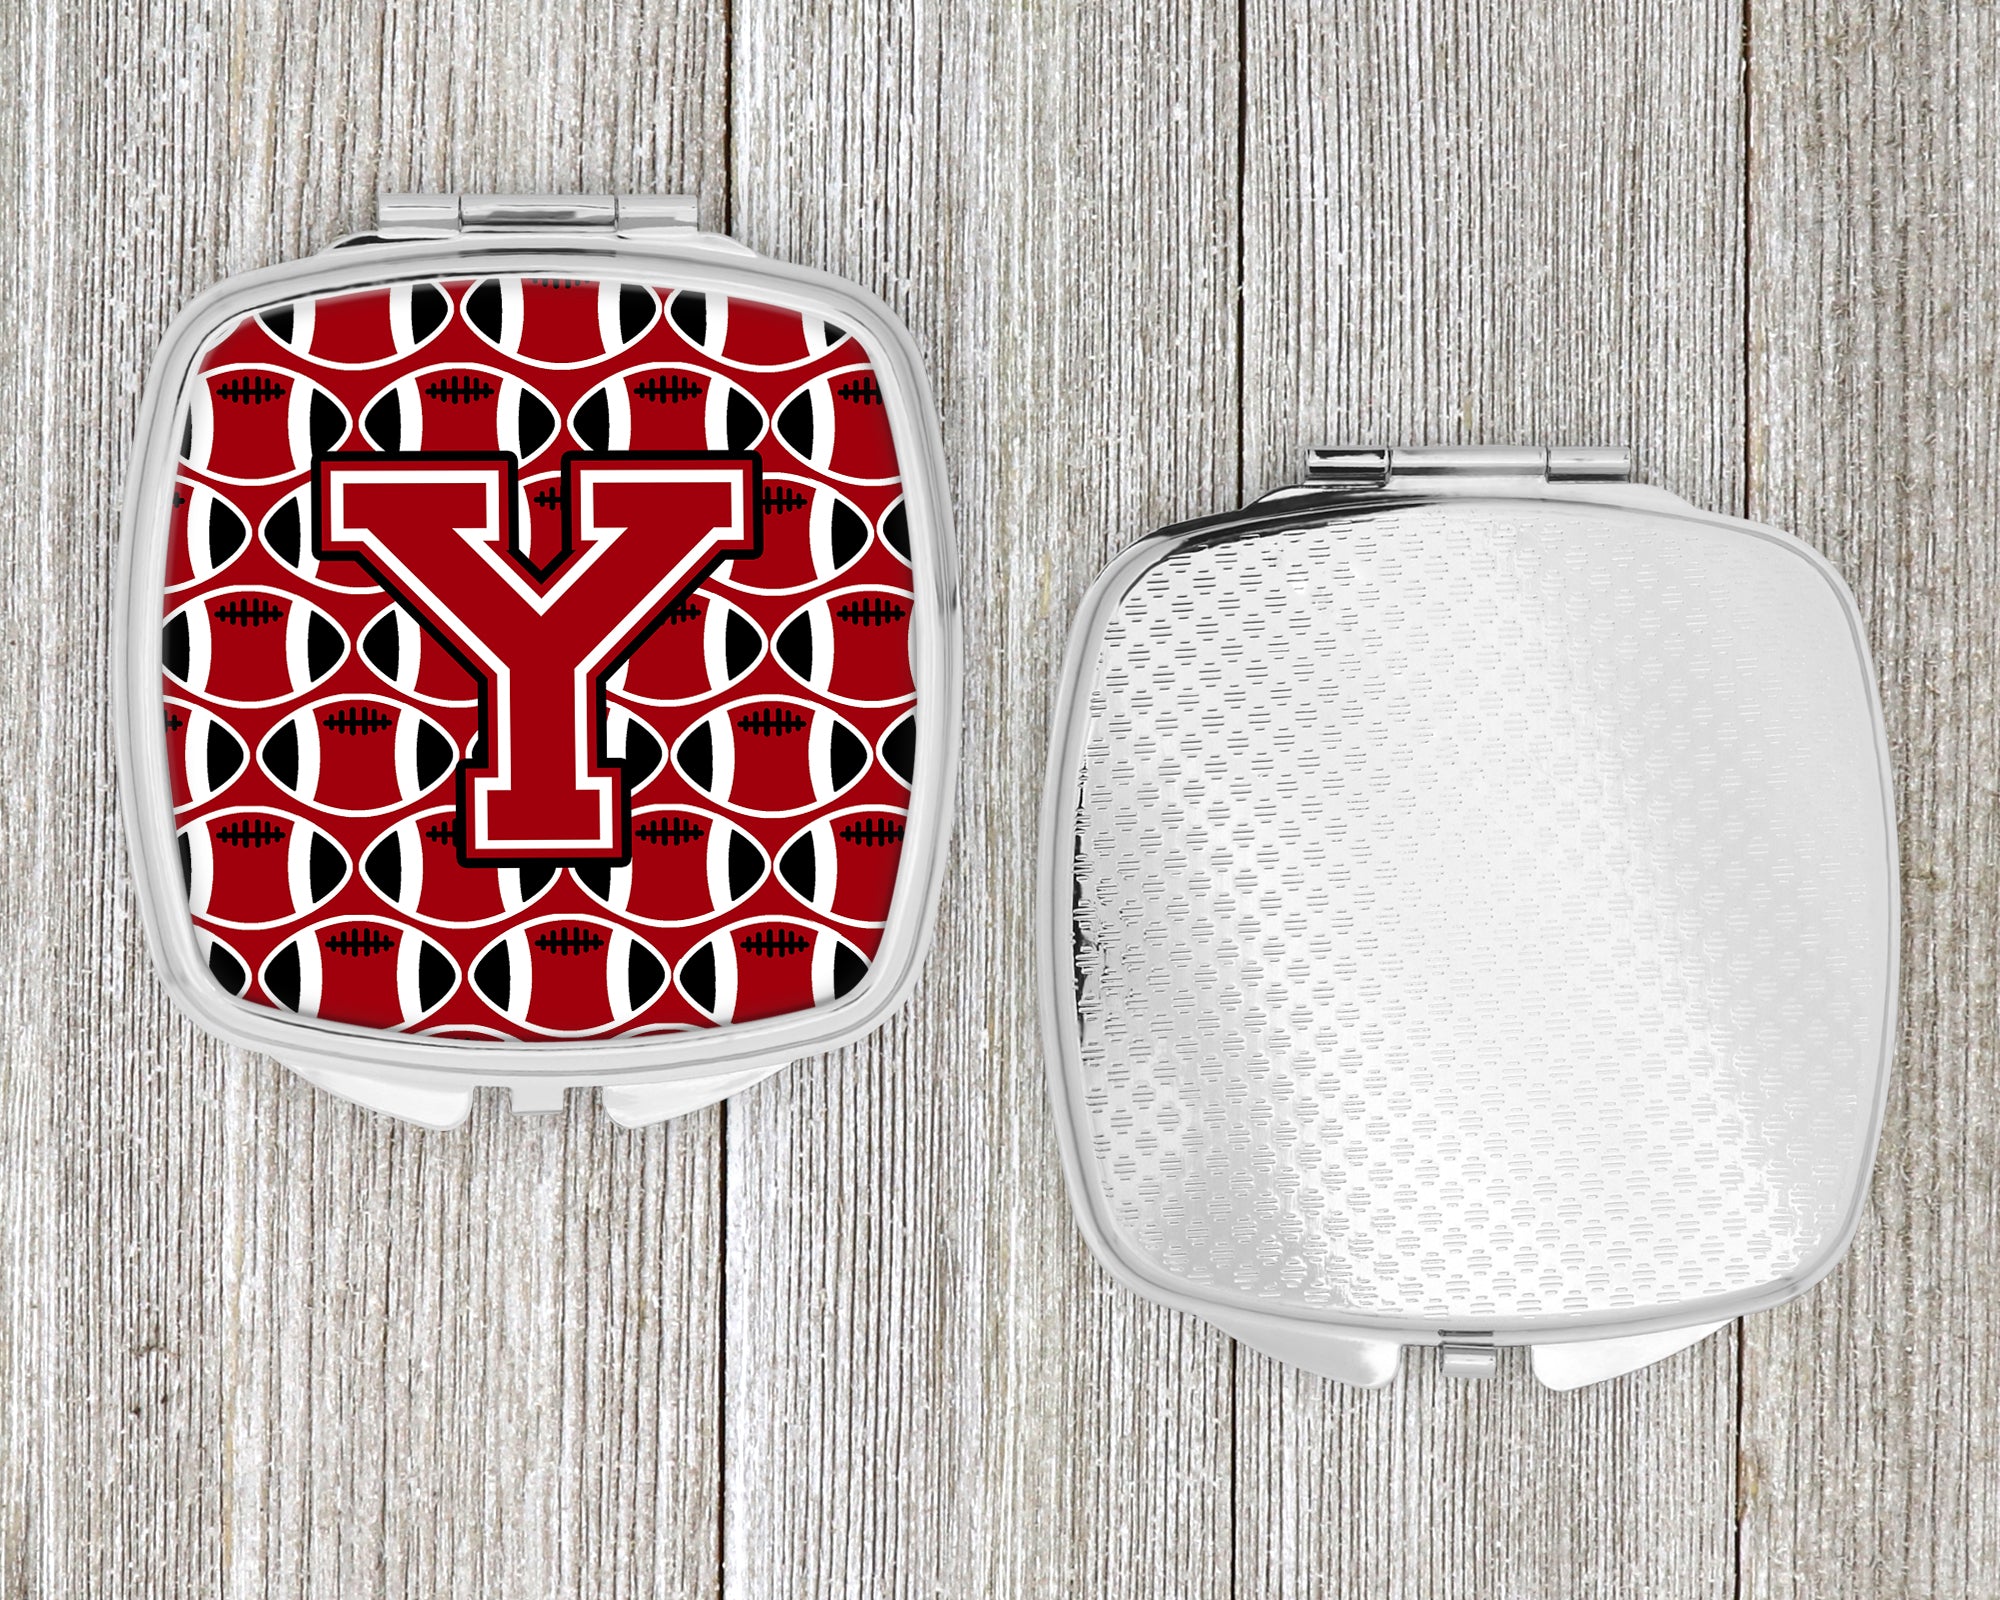 Letter Y Football Red, Black and White Compact Mirror CJ1073-YSCM  the-store.com.